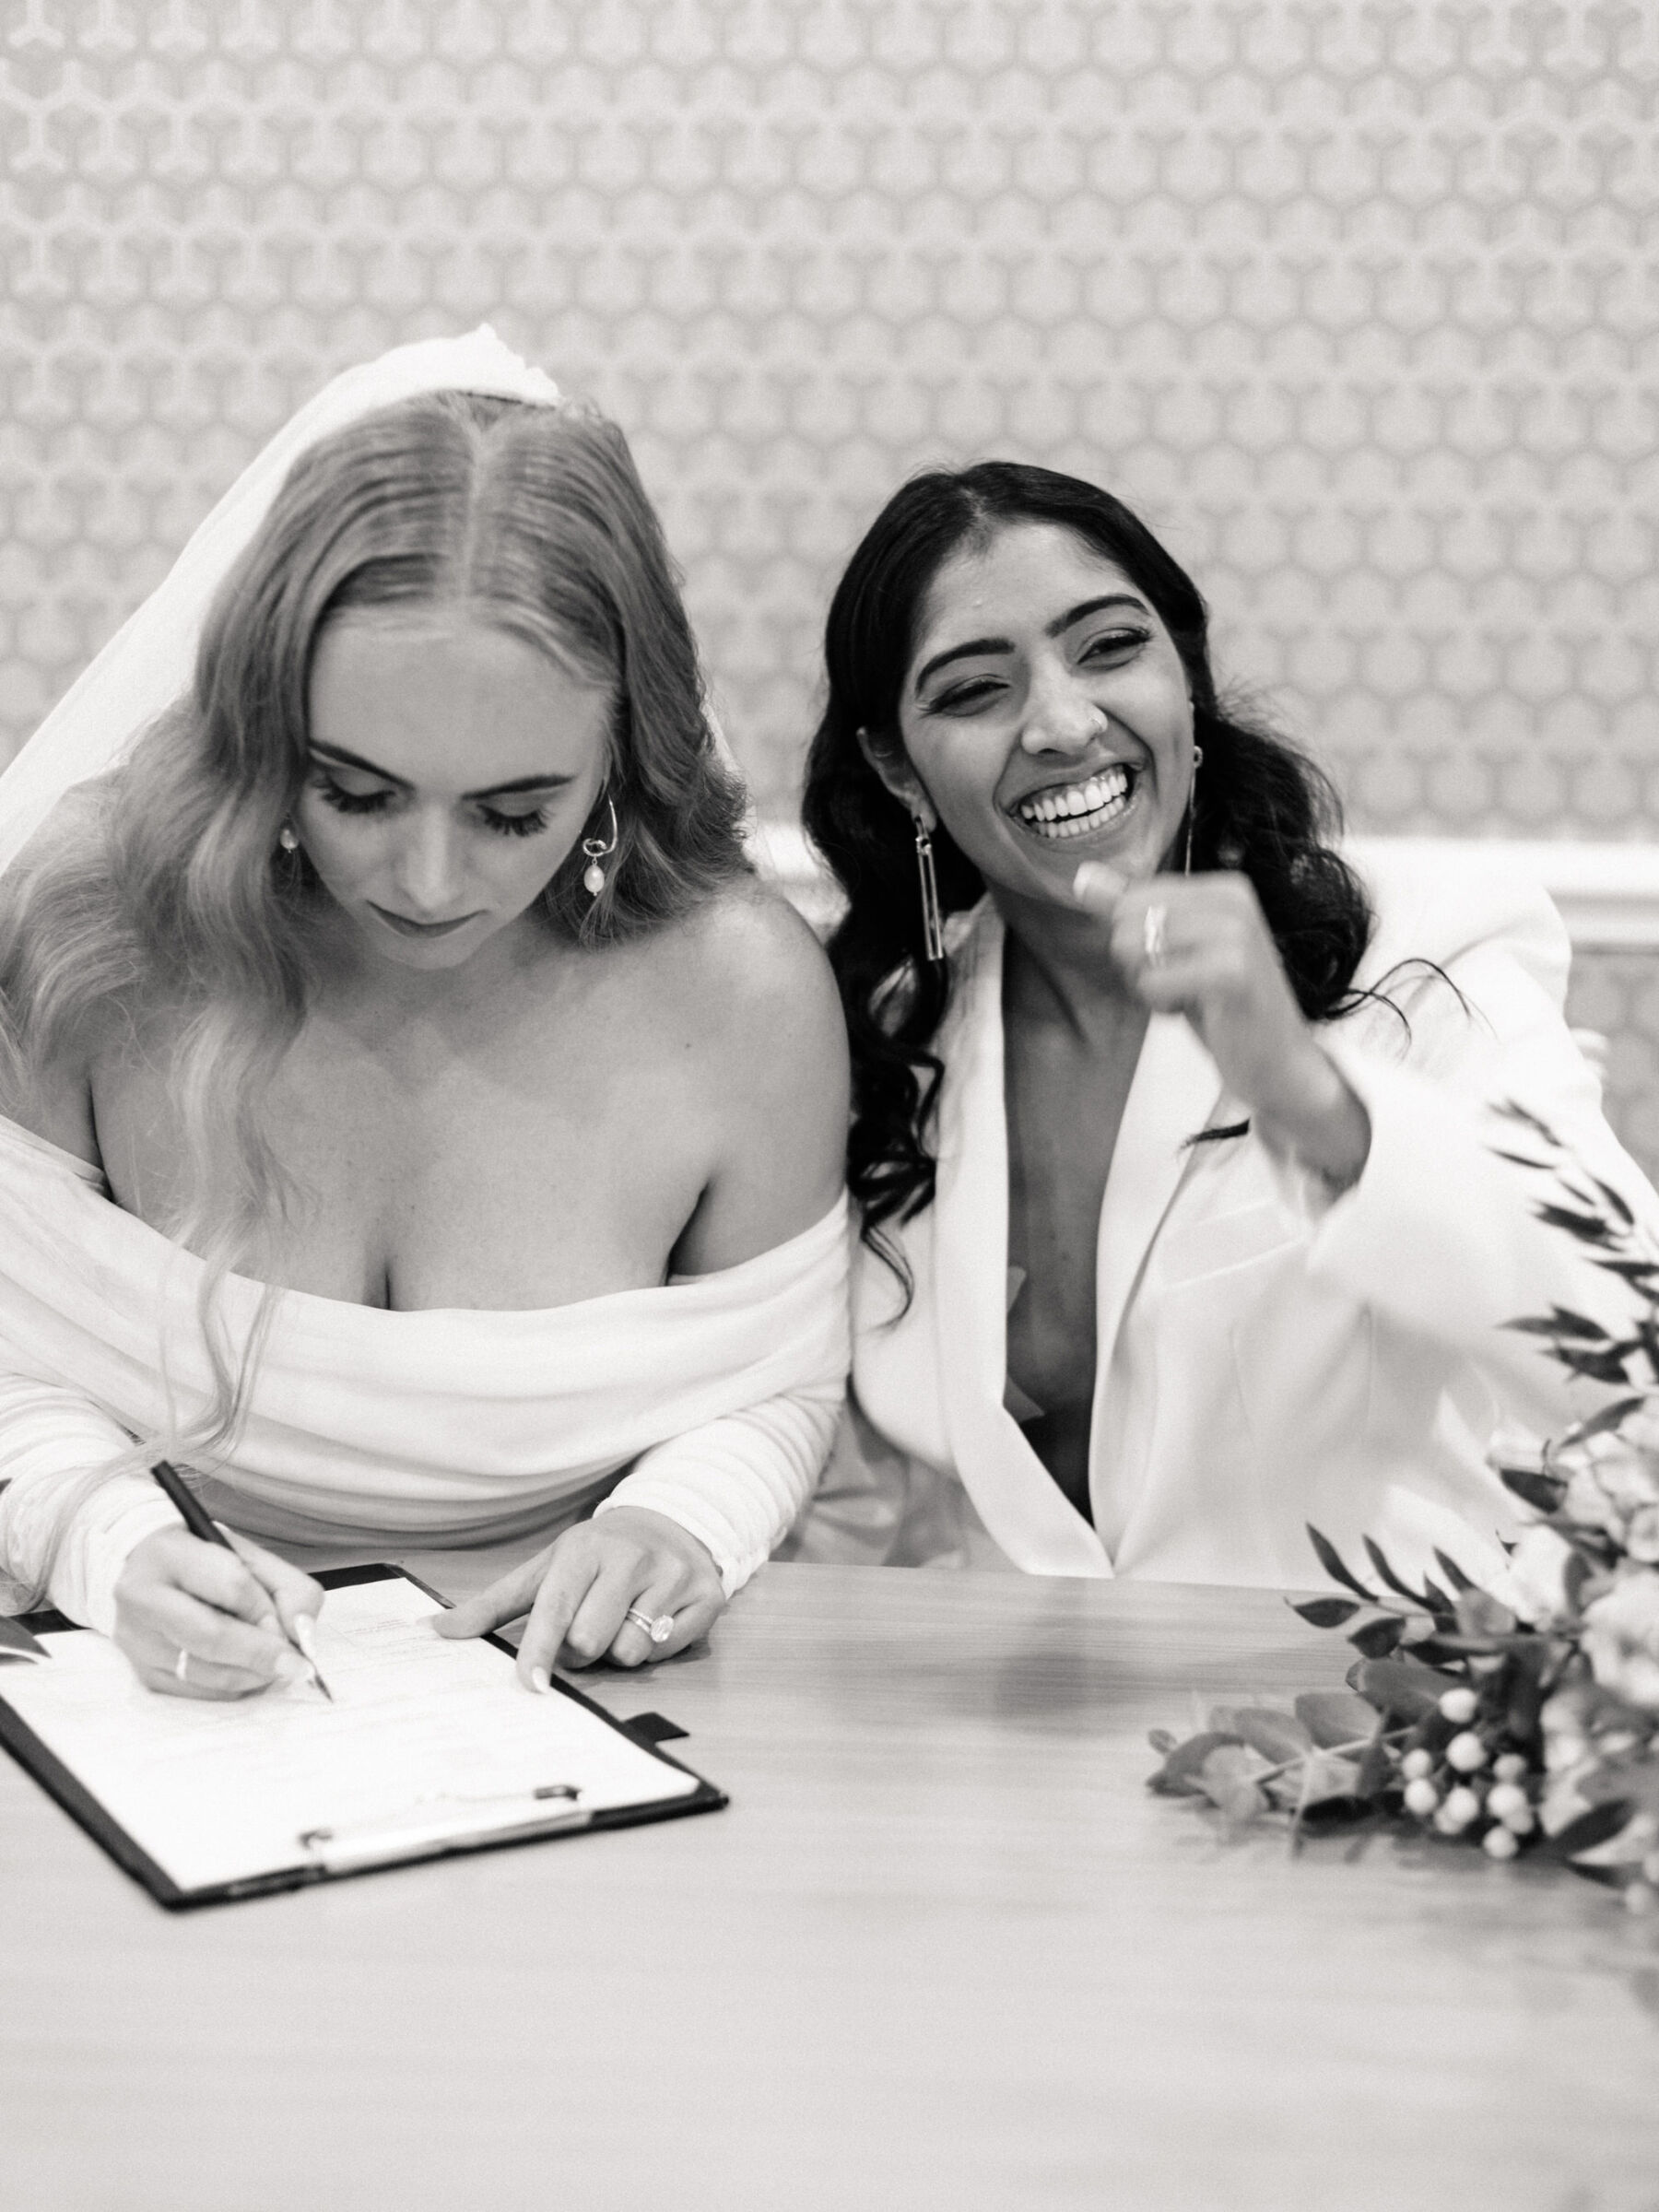 Lesbians signing the register at their wedding at Manchester Registry Office. Daniel Mice Photography.